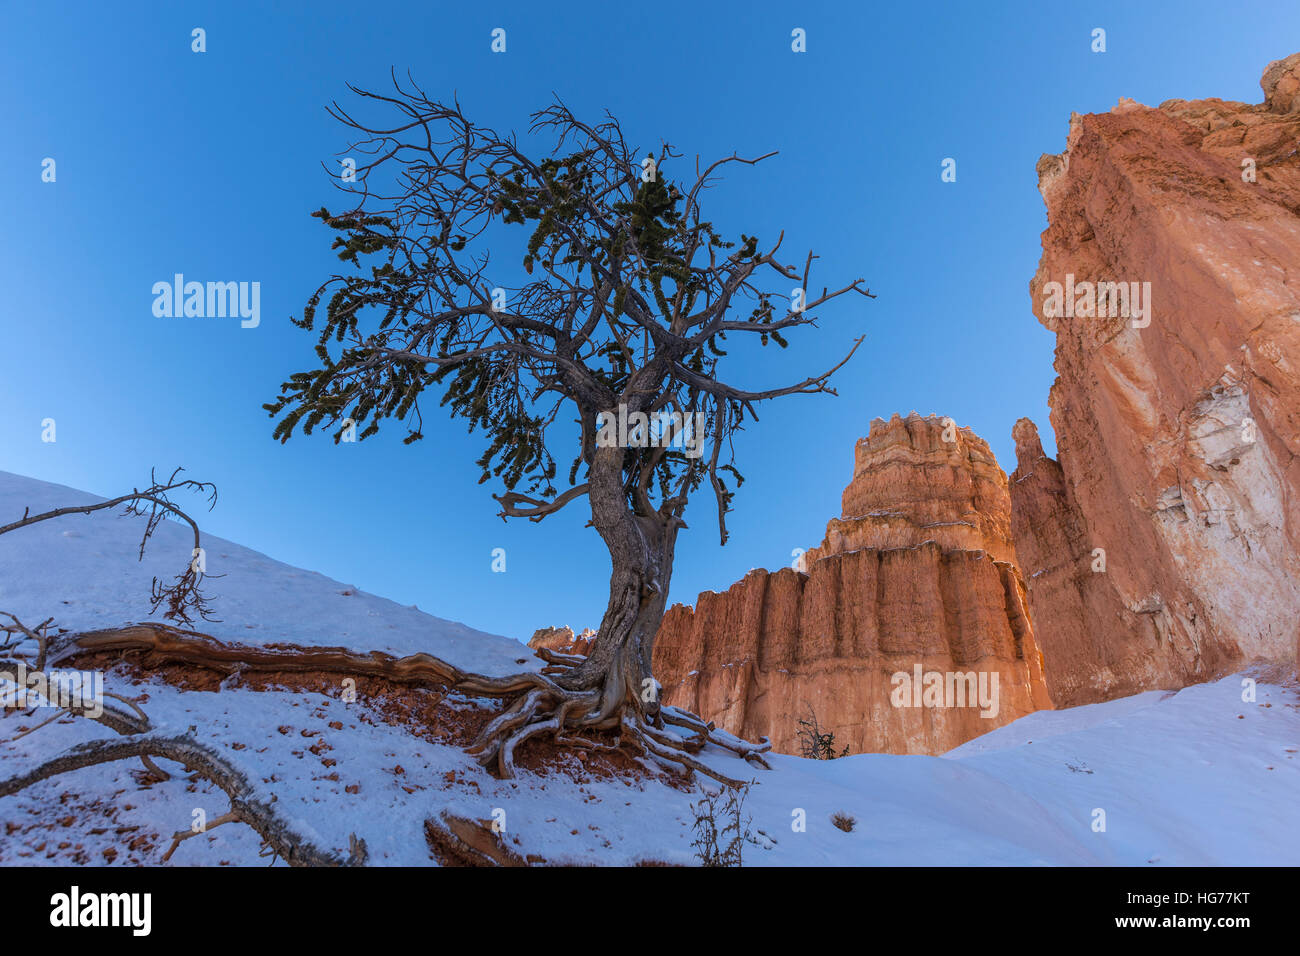 Snowy pine and hoodoos at Bryce Canyon National Park in Southern Utah. Stock Photo